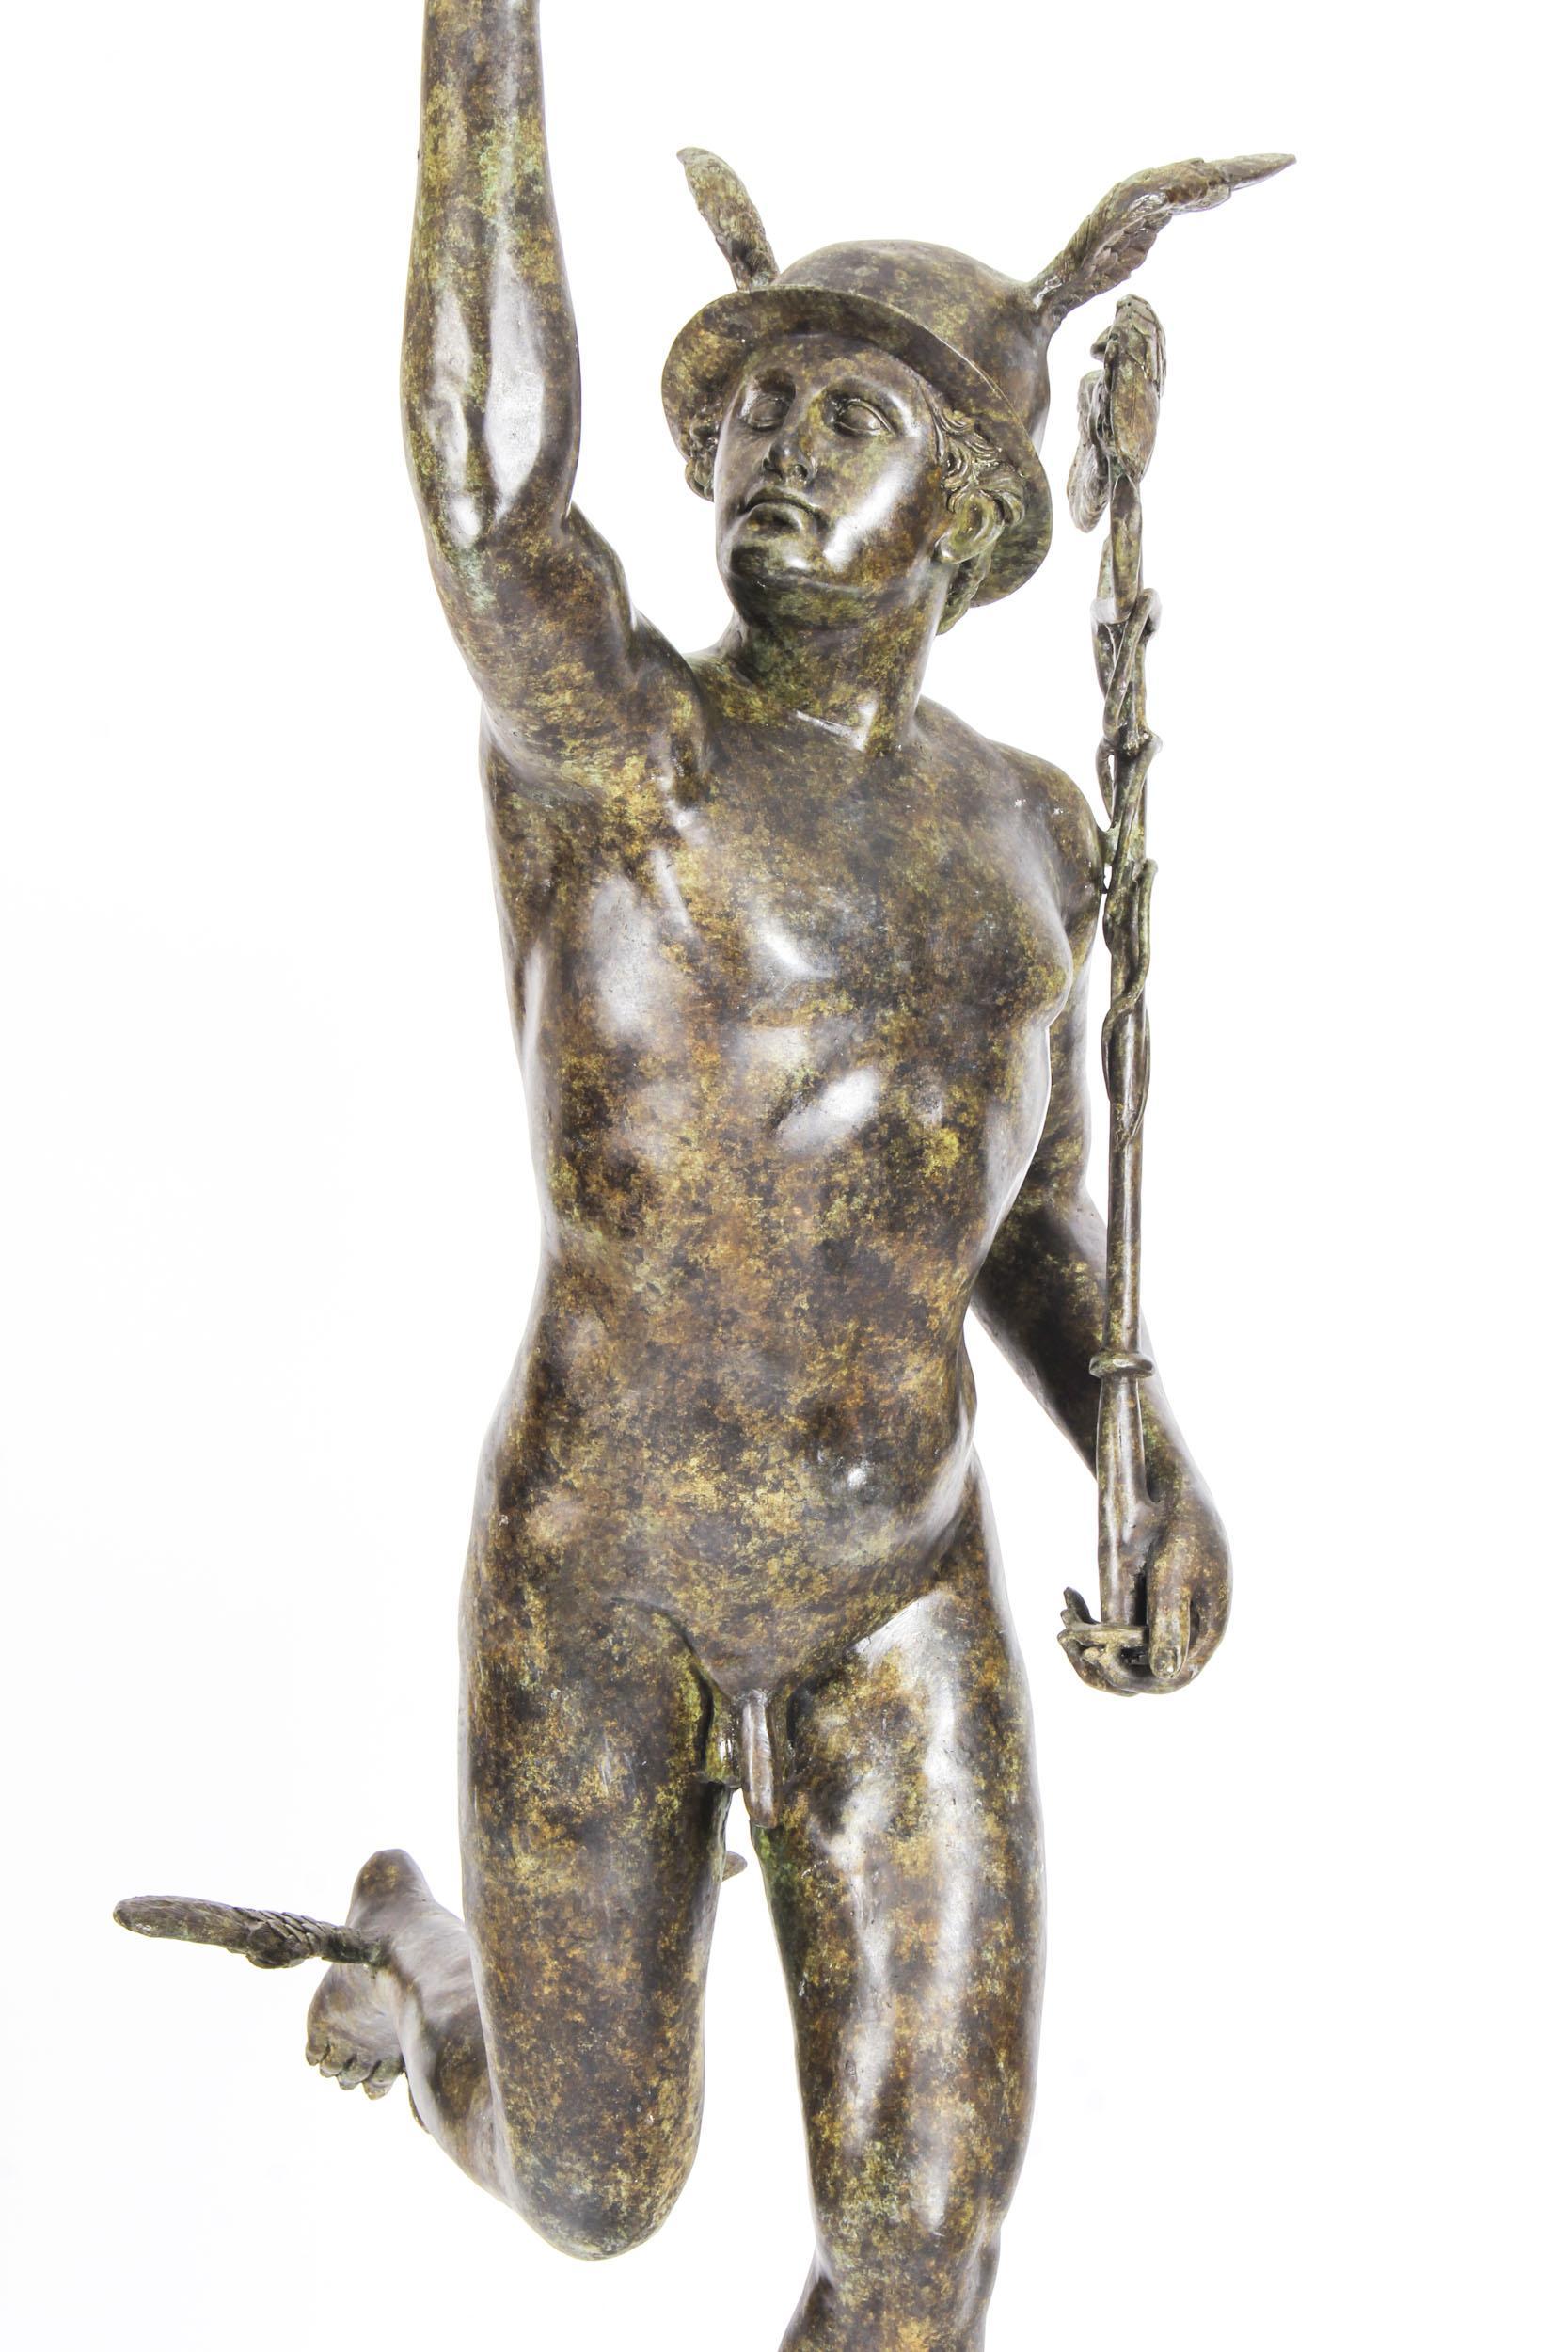 This is a large and beautifully detailed bronze sculpture of Mercury, also known as Hermes, dating from the second half of the 20th century.

Mercury is beautifully depicted with a striking verdigris patina, standing on a gust of wind issued from